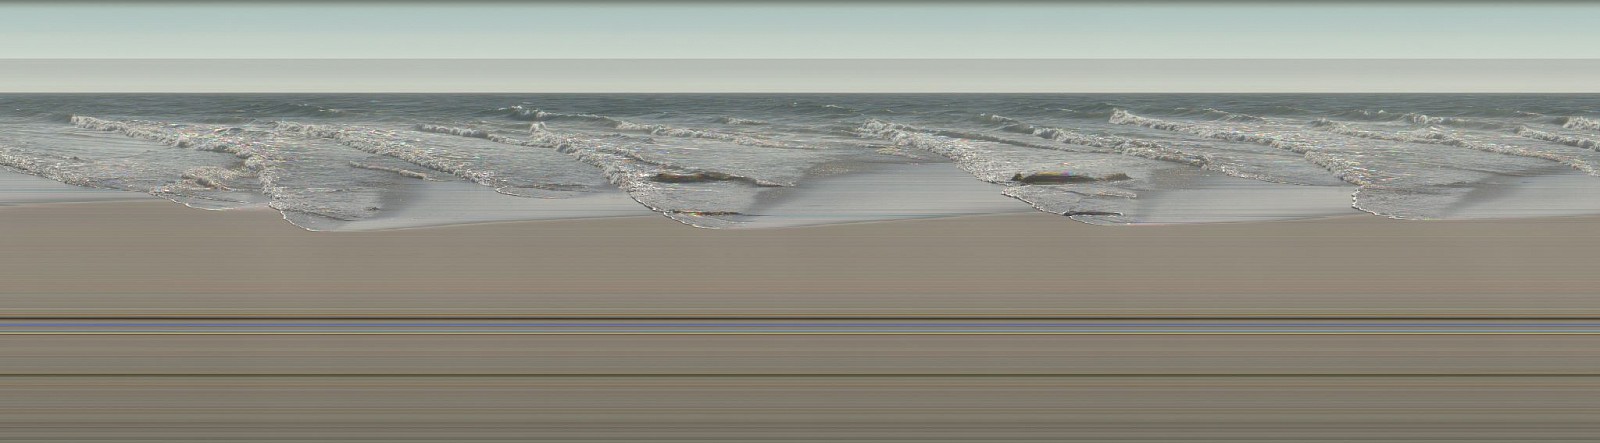 Jay Mark Johnson, POINT DUME WAVES #4, 2006 Malibu CA
archival pigment on paper, mounted on aluminum, 40 x 144 in. (101.6 x 365.8 cm)